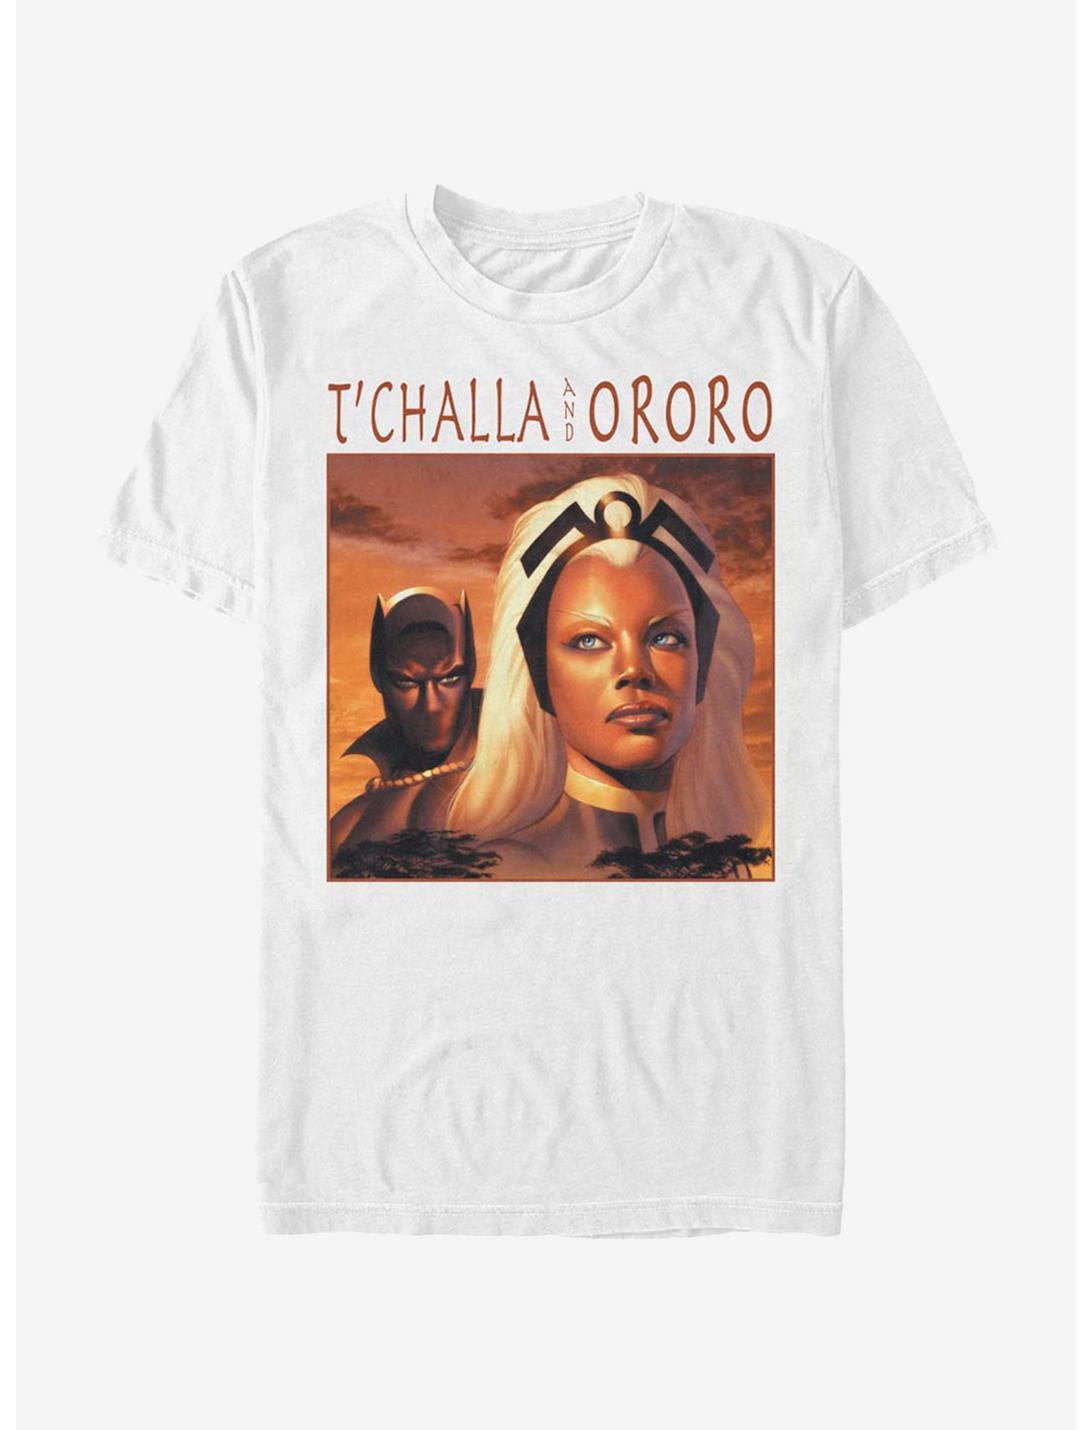 Marvel Black Panther T'challa and Ororo Power T-Shirt, WHITE, hi-res